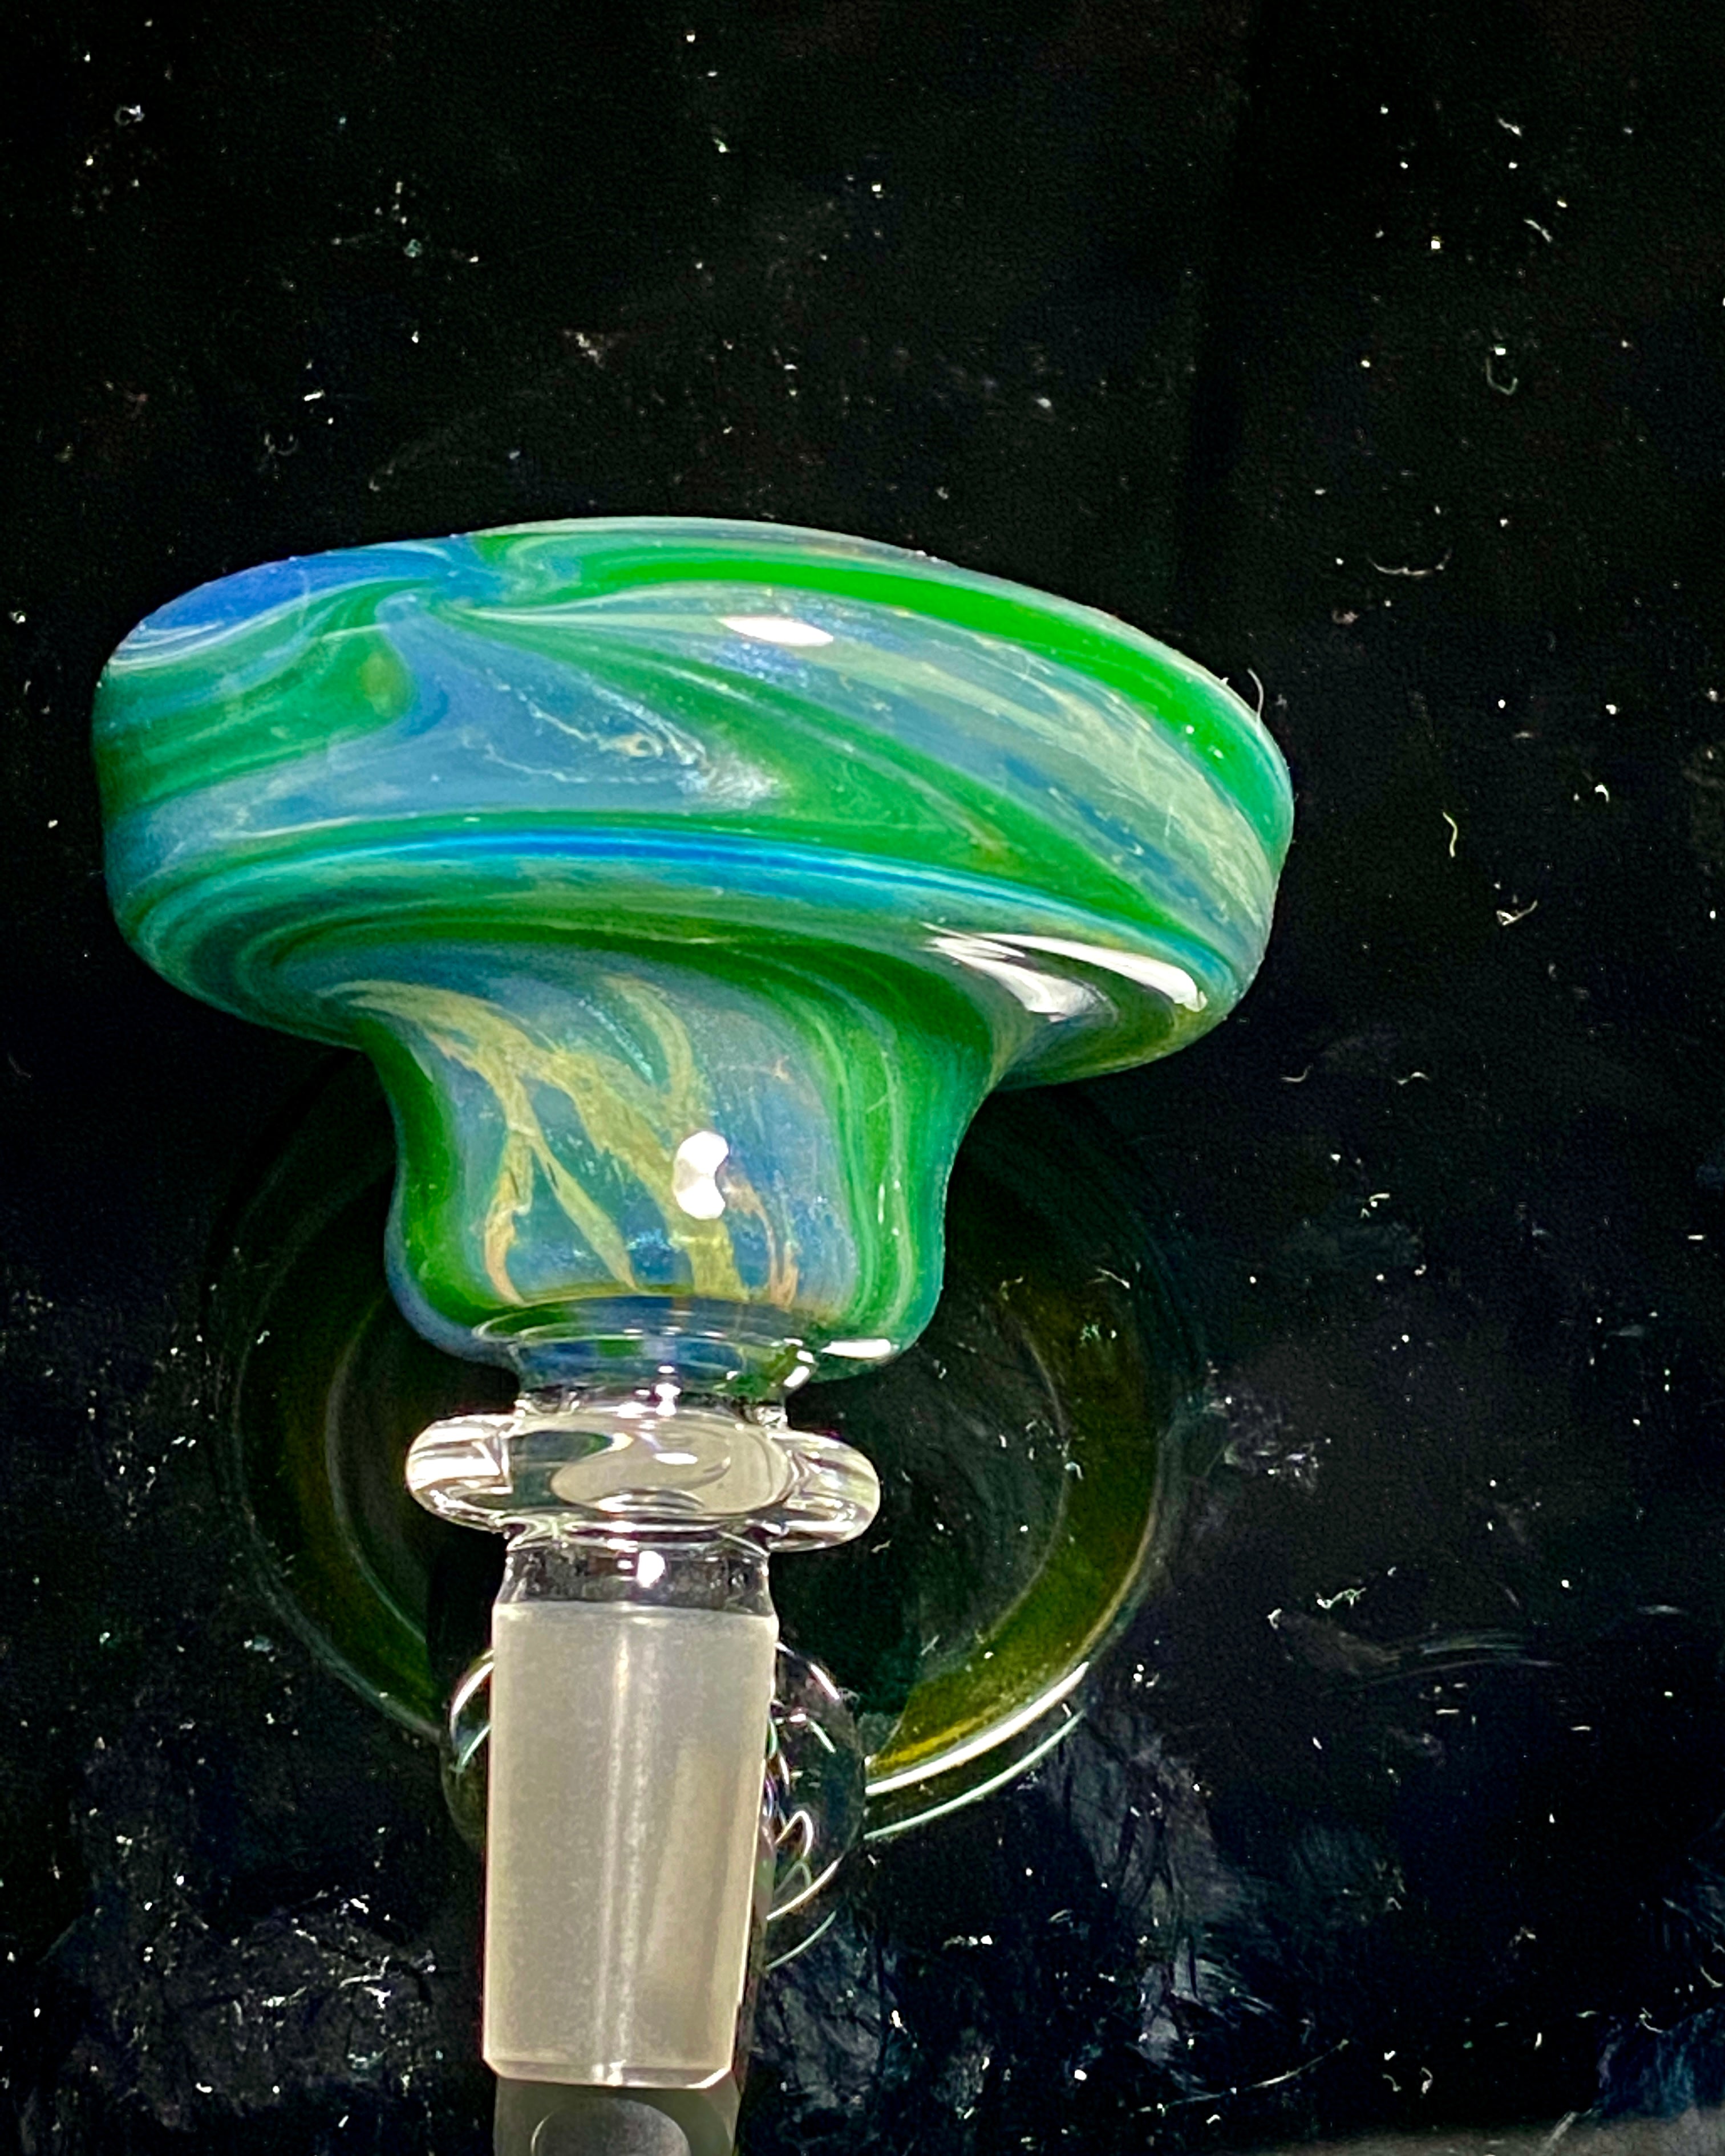 Jhanny Rise Saucer Bowl 14mm #1 - TheSmokeyMcPotz Collection 